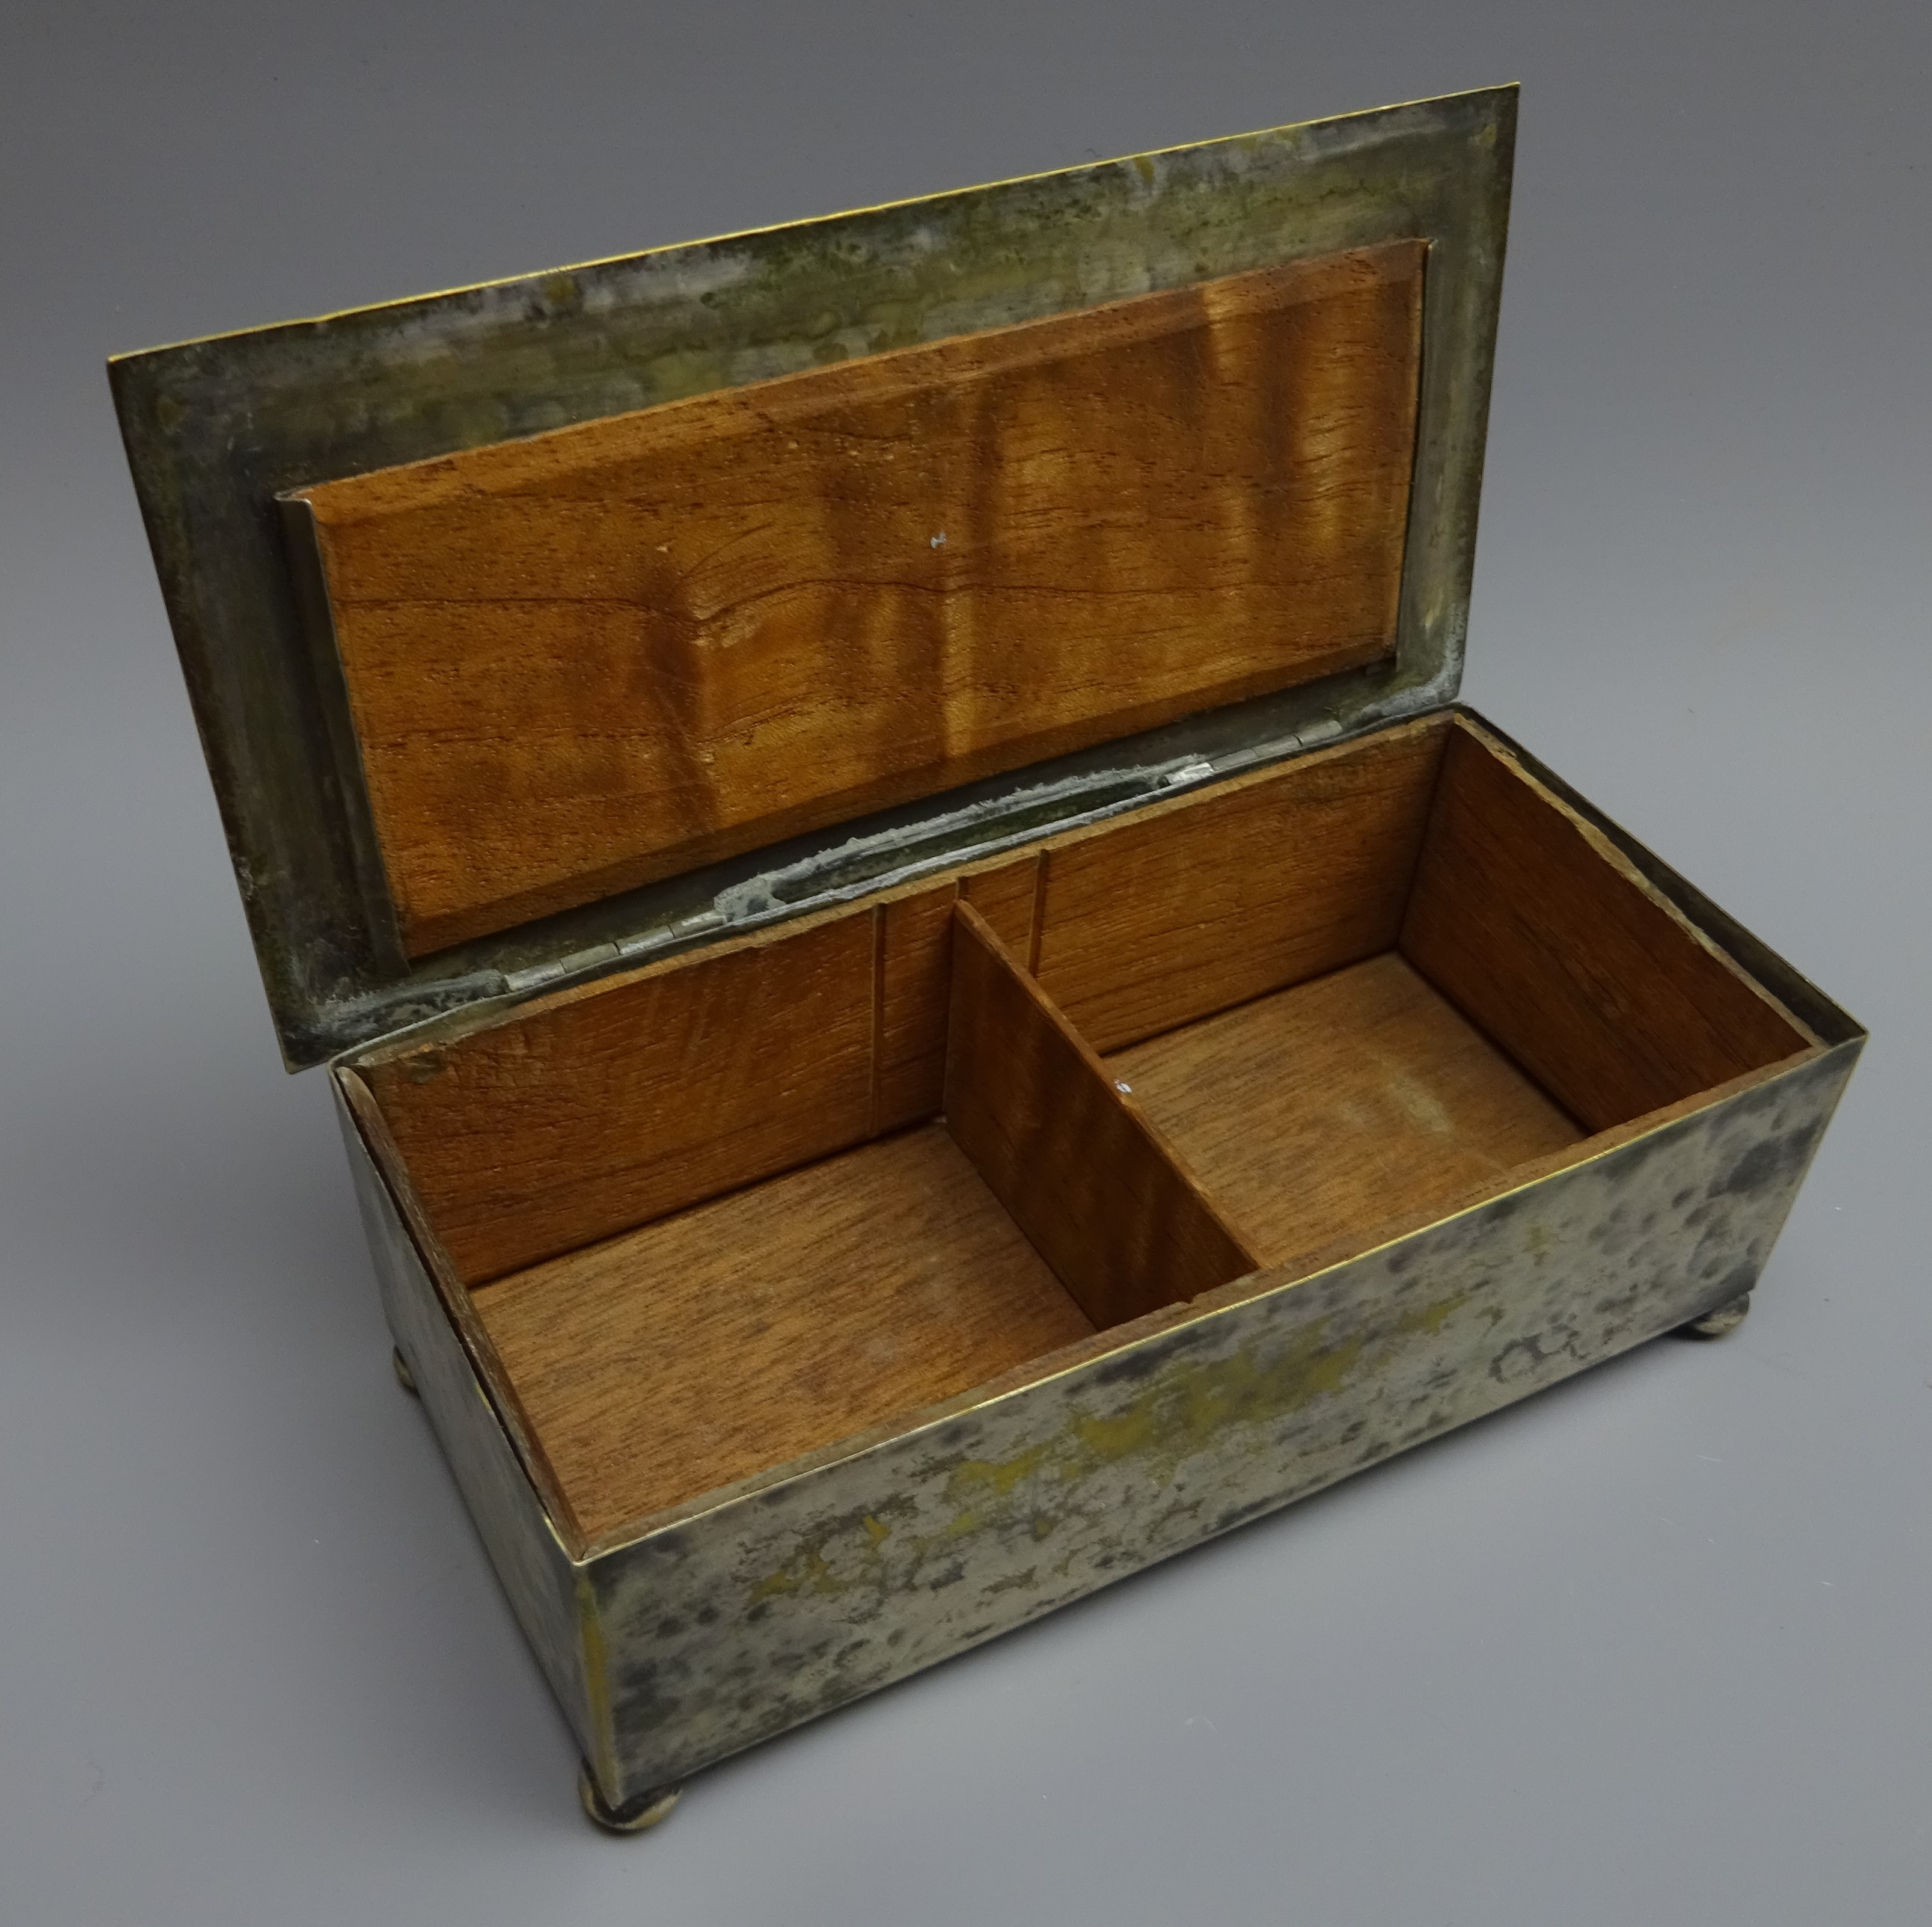 Lancashire Fusiliers table cigarette box, hammered silvered body with wood lined interior, - Image 3 of 7